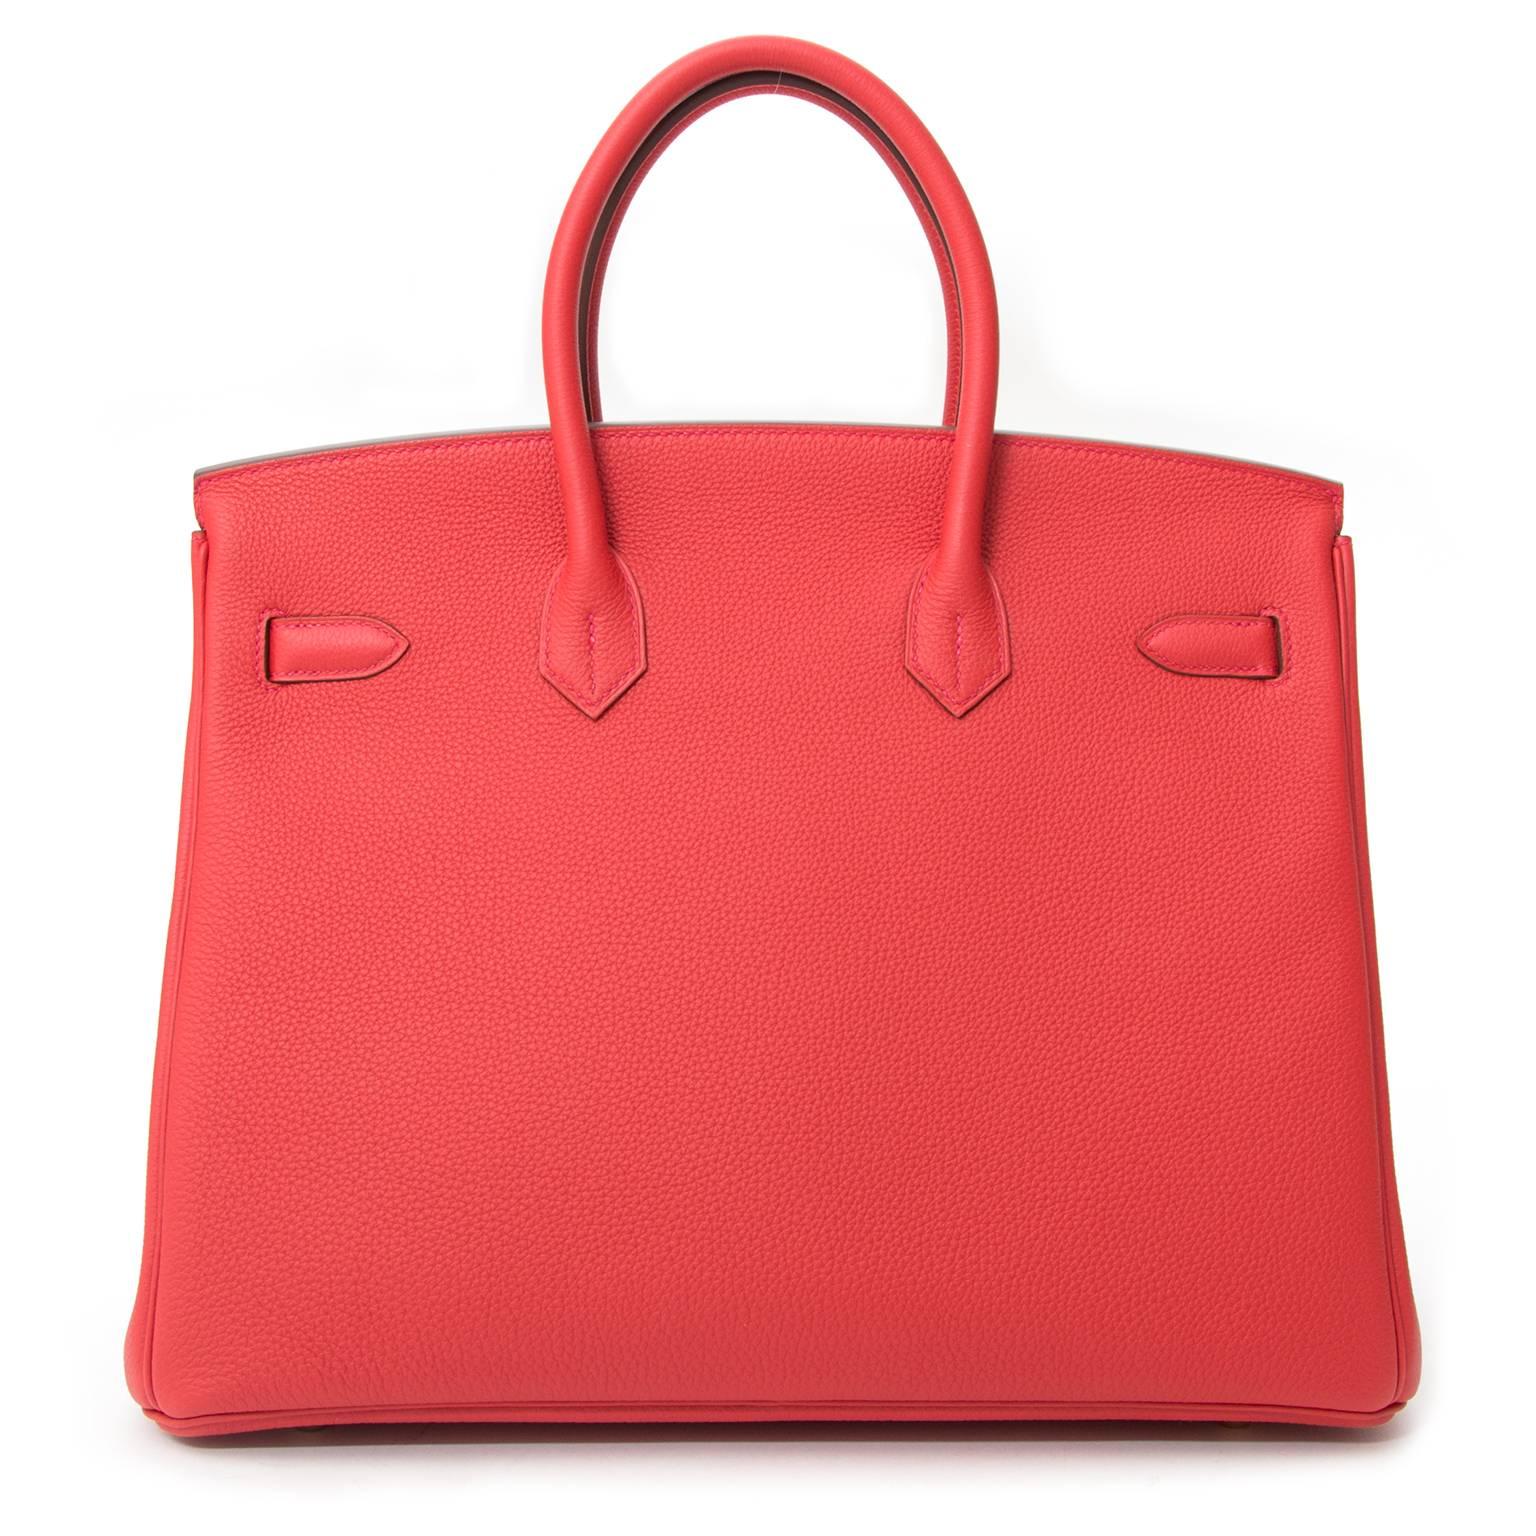 Brand New Hermes Birkin 35 Togo Geranium Red, never worn.

The Rouge Geranium leather on this Birkin has a dynamic red-orange burst . This BRAND NEW Birkin bag is the proof of the craftsmanship of the house of Hermès. It's not only the most